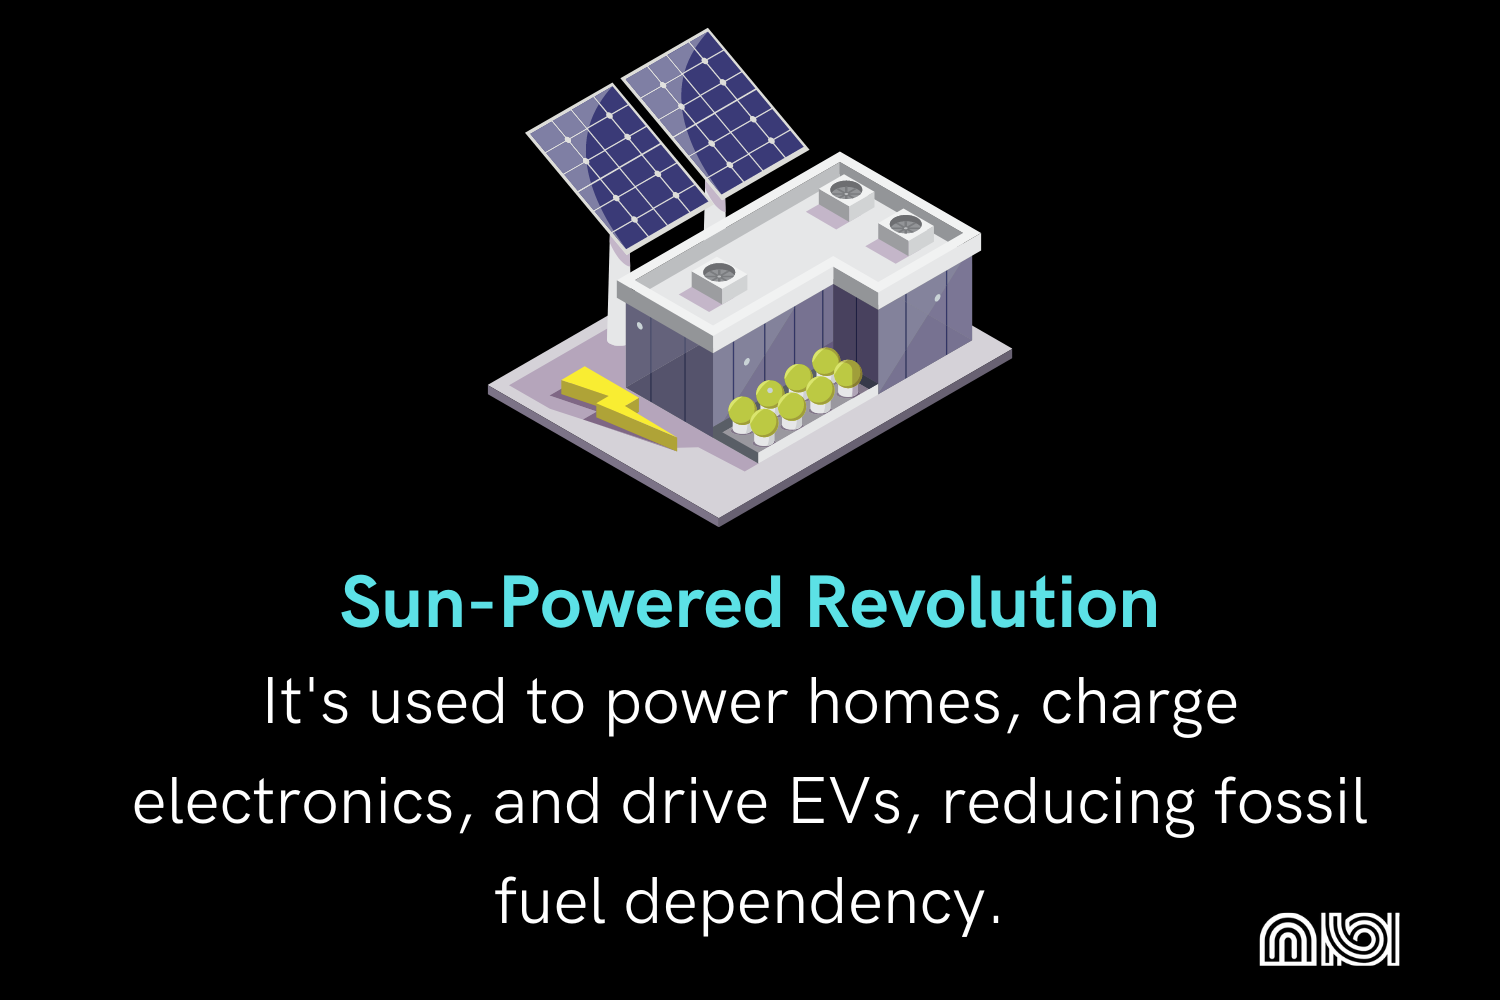 Solar power surge: Fueling electronics, homes, and EVs - Reducing fossil fuel dependency.